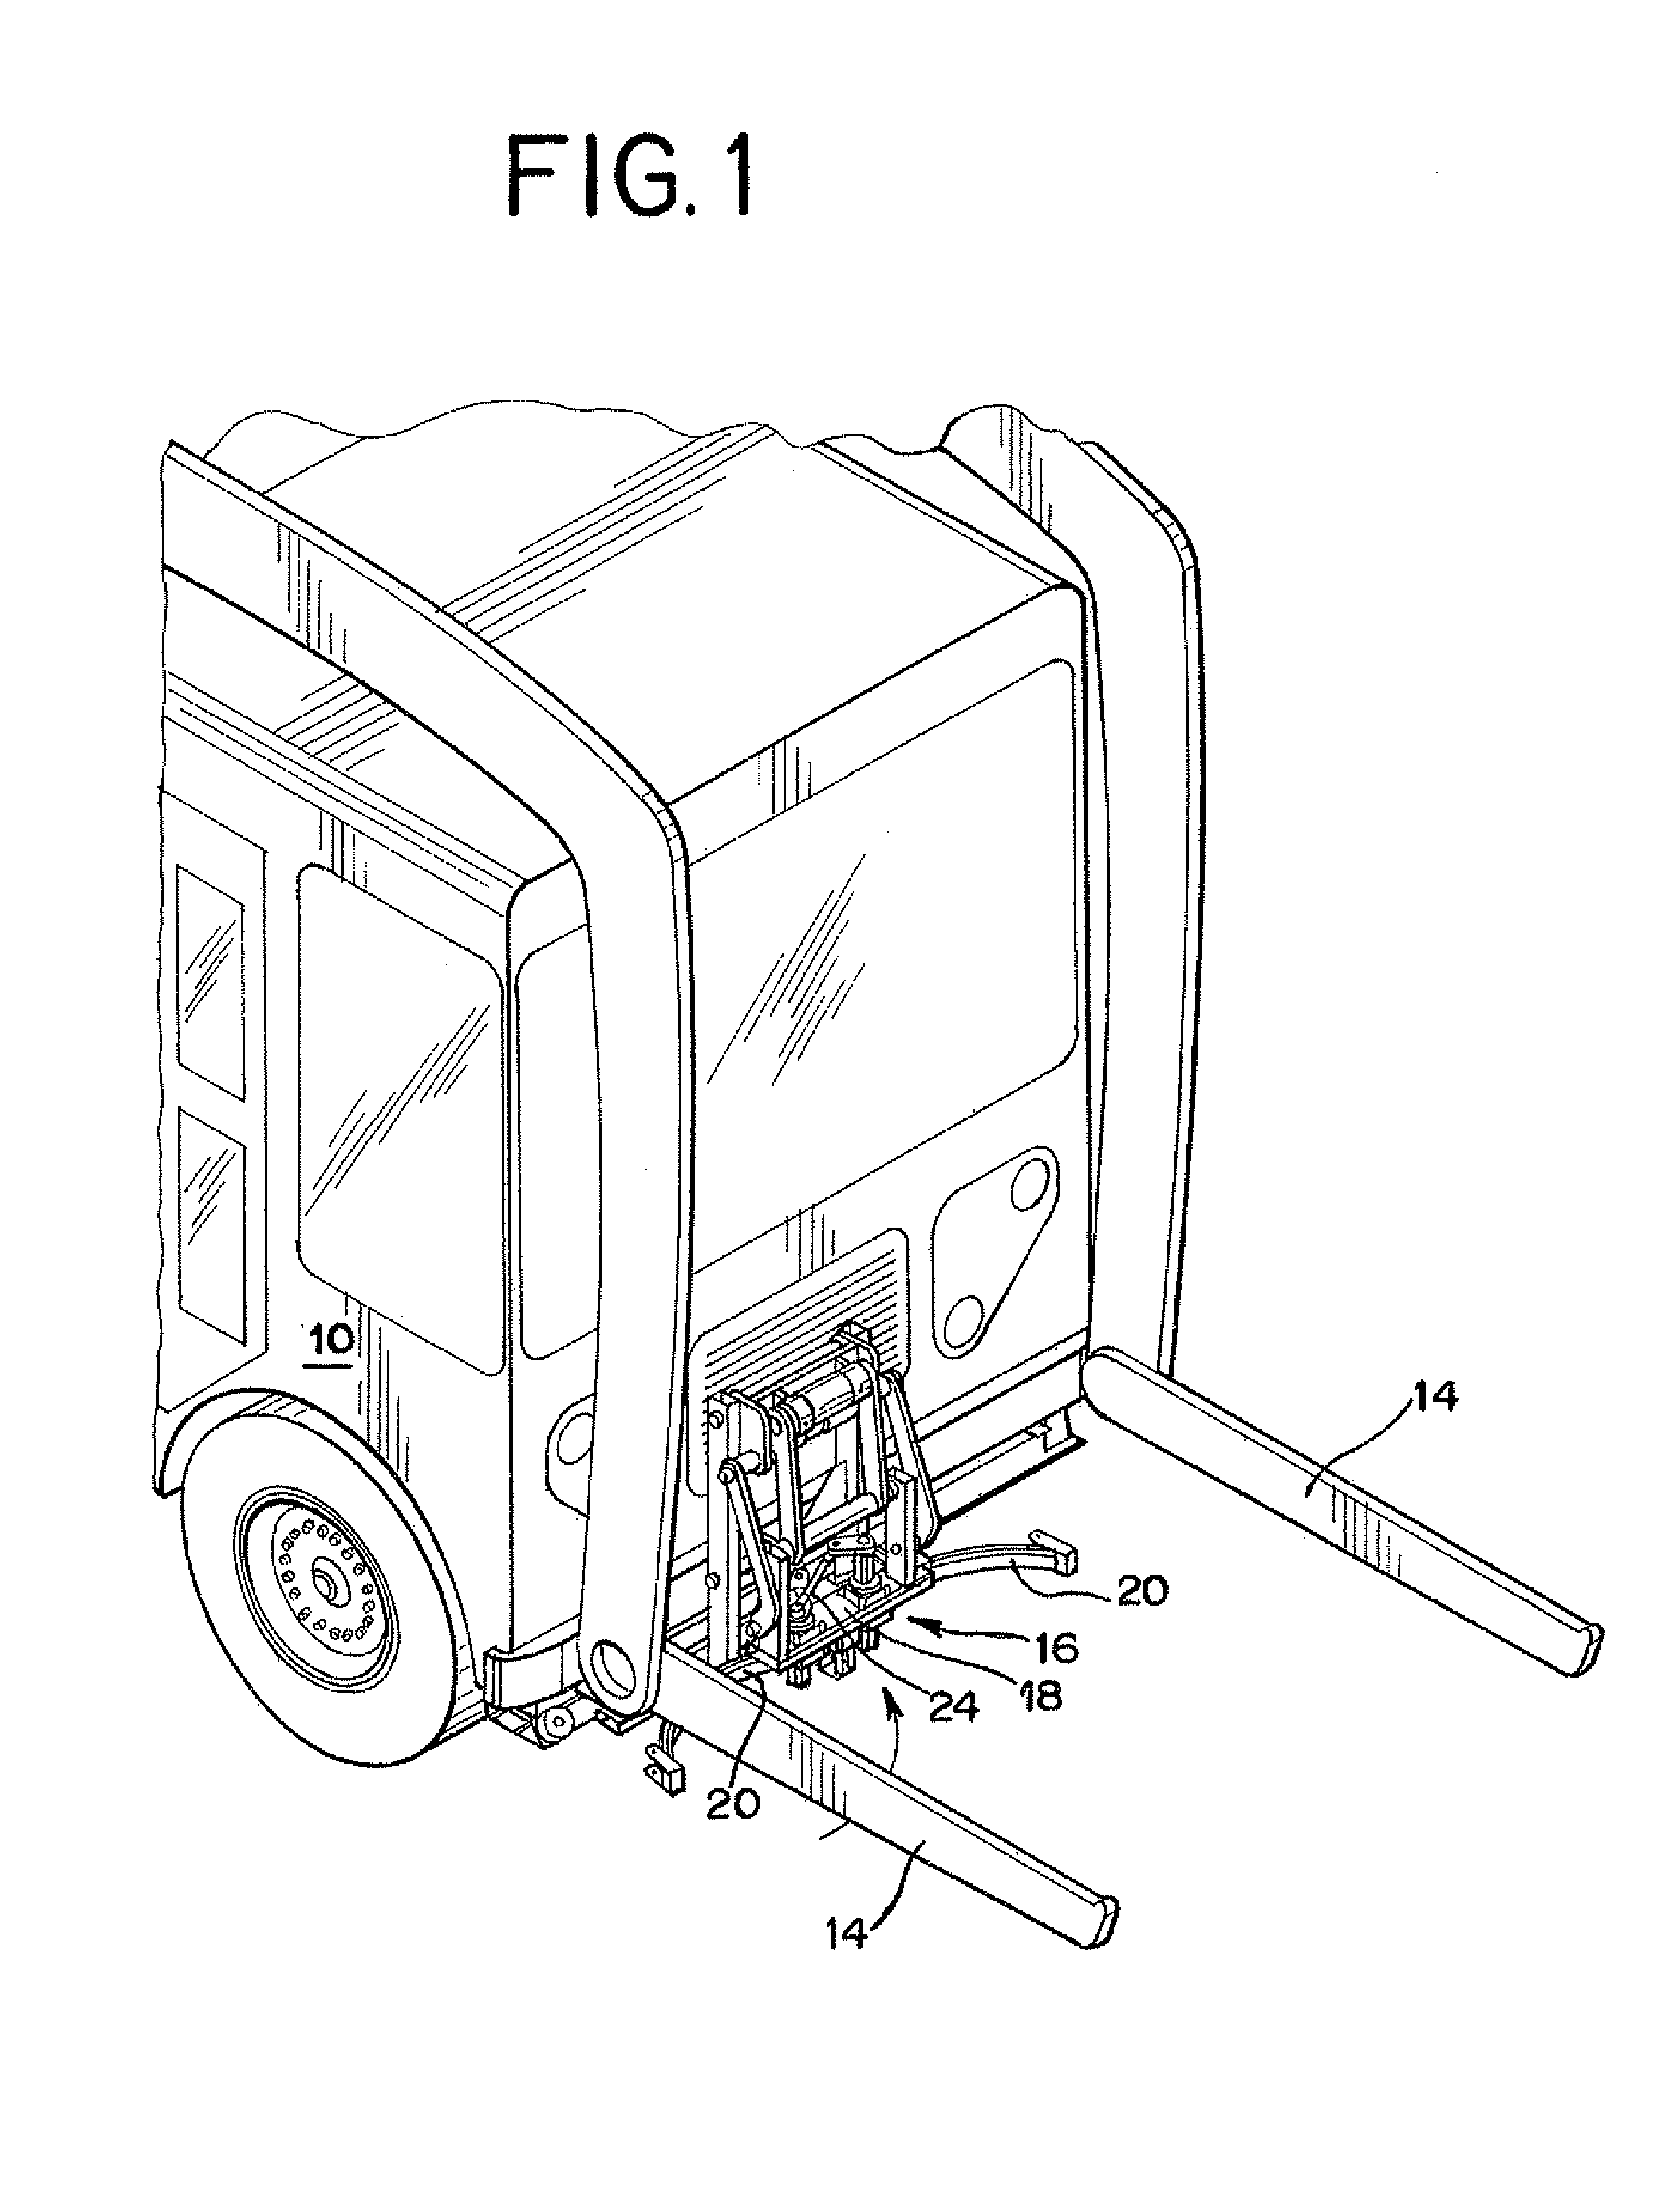 Front mounted lifter for front load vehicle